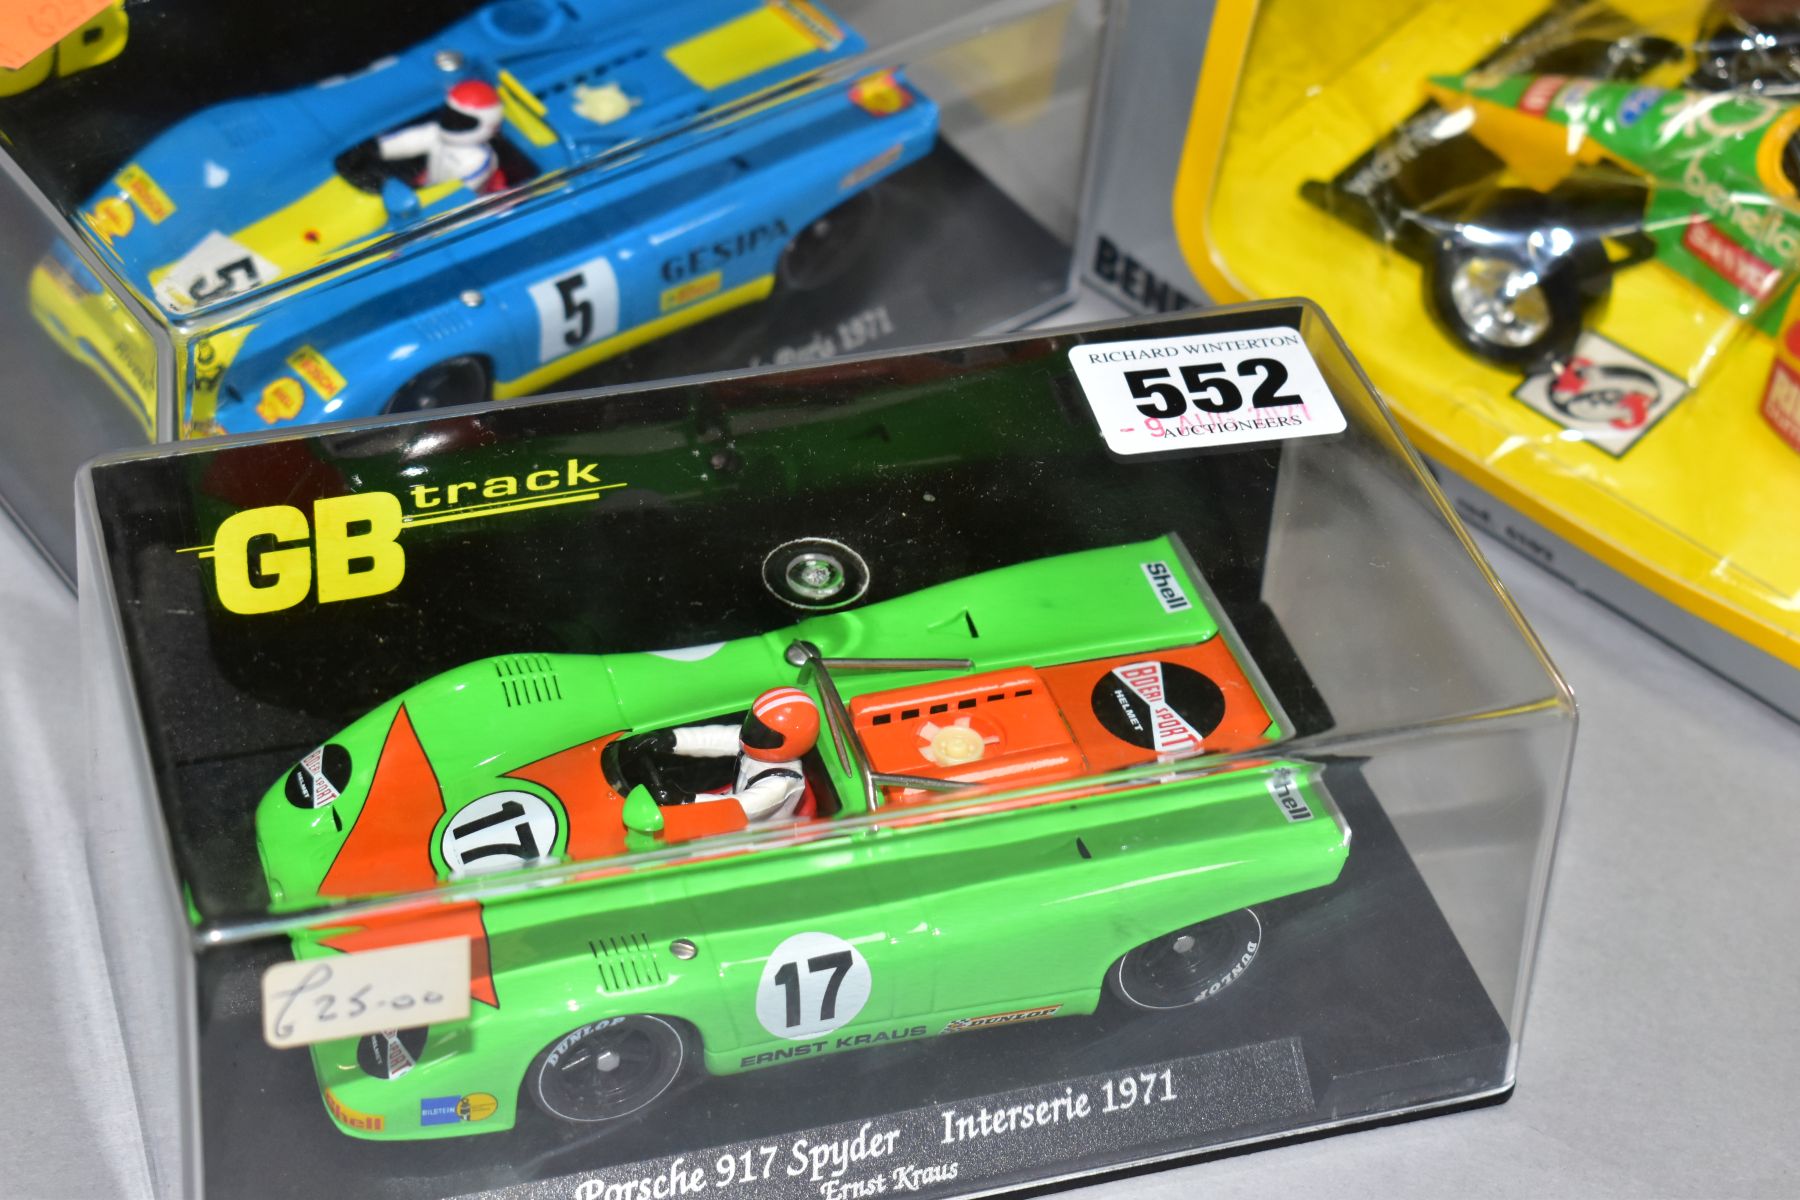 TWO BOXED GB TRACK PORSCHE 917 SPYDER SLOT RACIING CAR MODEL,S Interserie 1971, No.GB3 and 1000 KM - Image 4 of 4